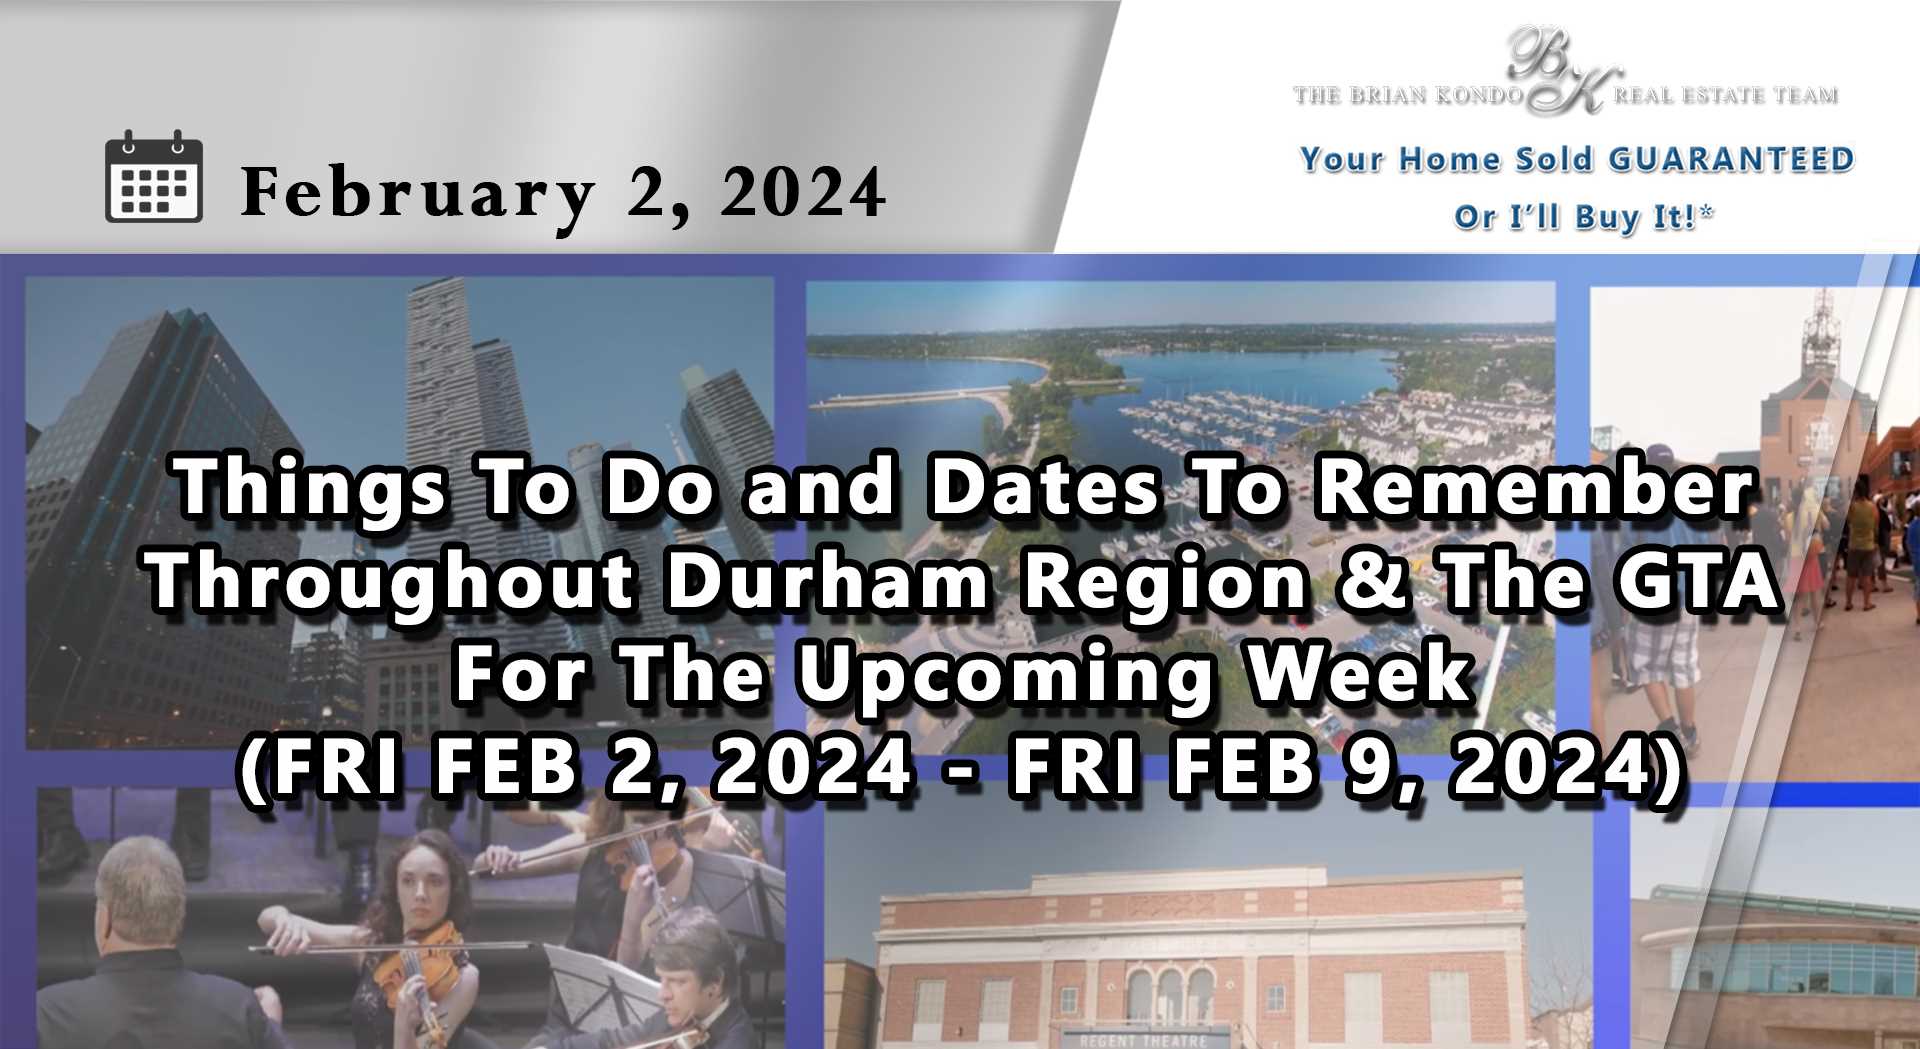 Things To Do and Dates To Remember Throughout Durham Region and The GTA For The Upcoming Week (FRI FEB 2, 2024 - FRI FEB 9, 2024)